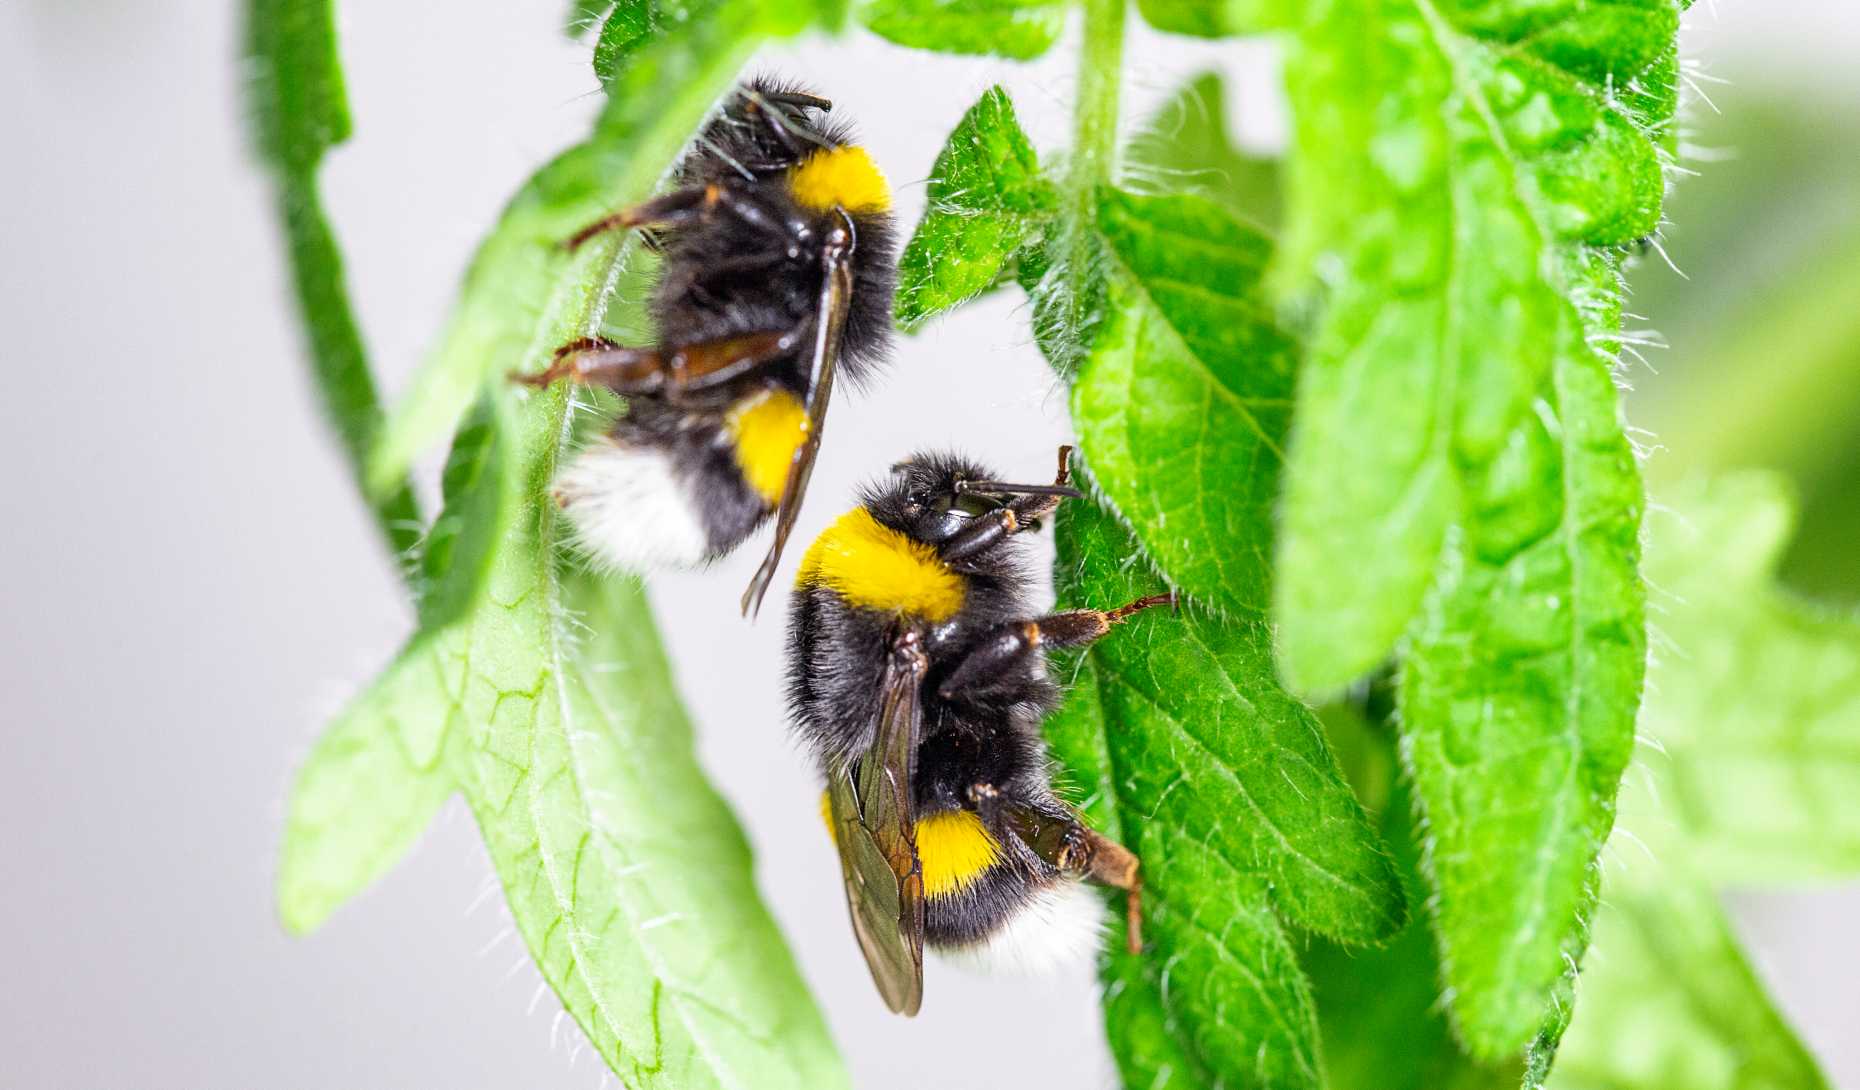 Plant-pollinator interactions. Photo: Biocommunication research group, ETH Zurich